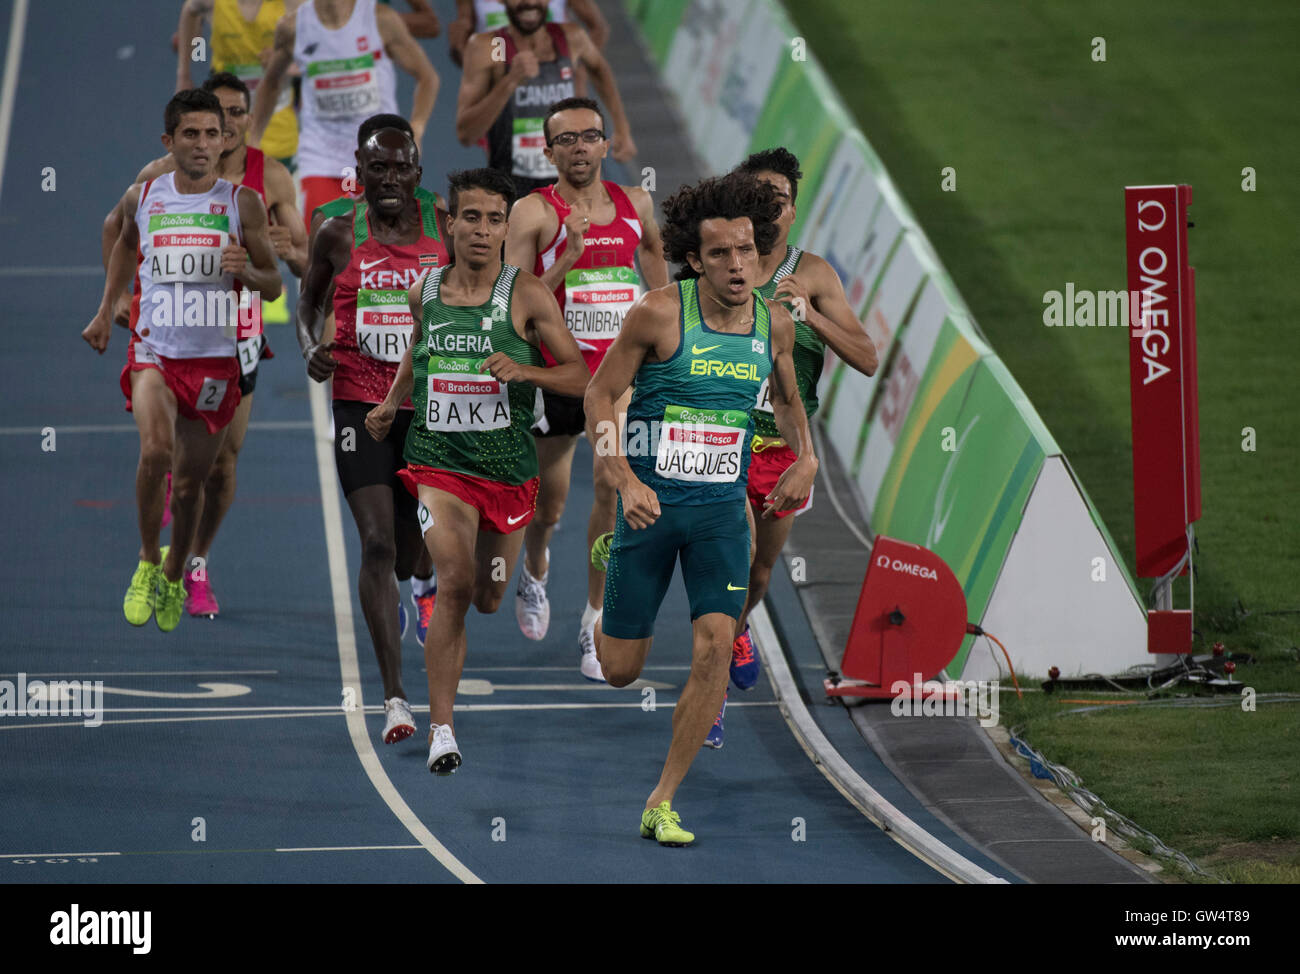 Visually impaired runners compete in the 1,500-meter T13 race at the 2016 Rio Paralympic Games. Stock Photo